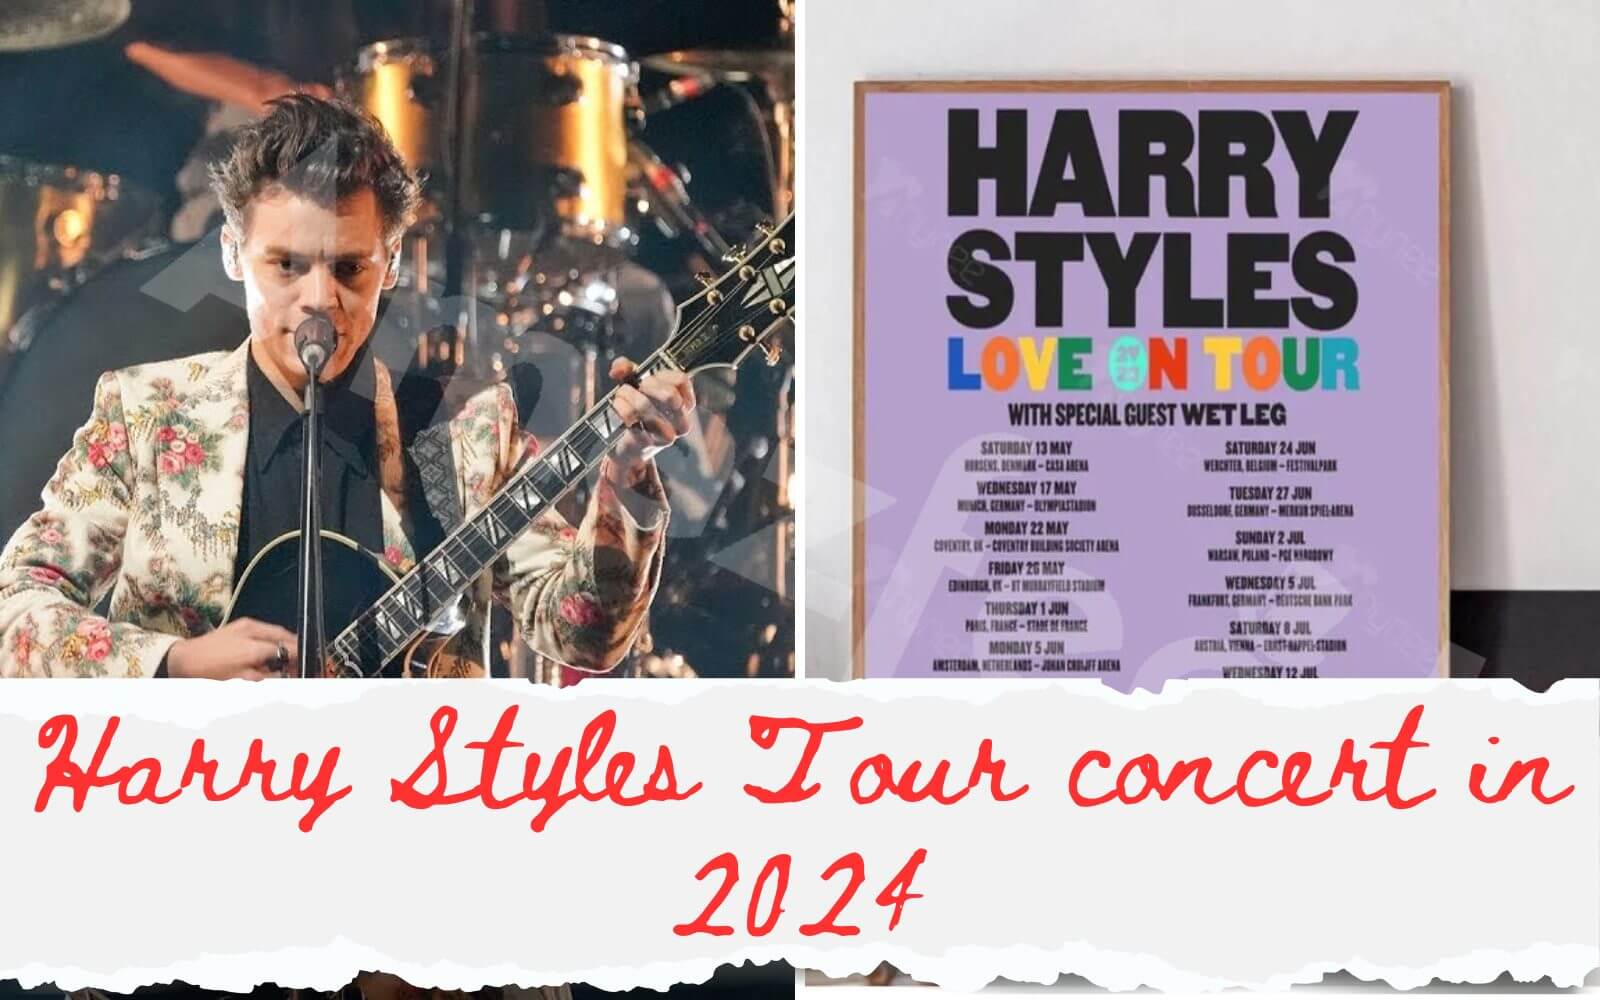 Where and where is the Harry Styles Tour concert in 2024